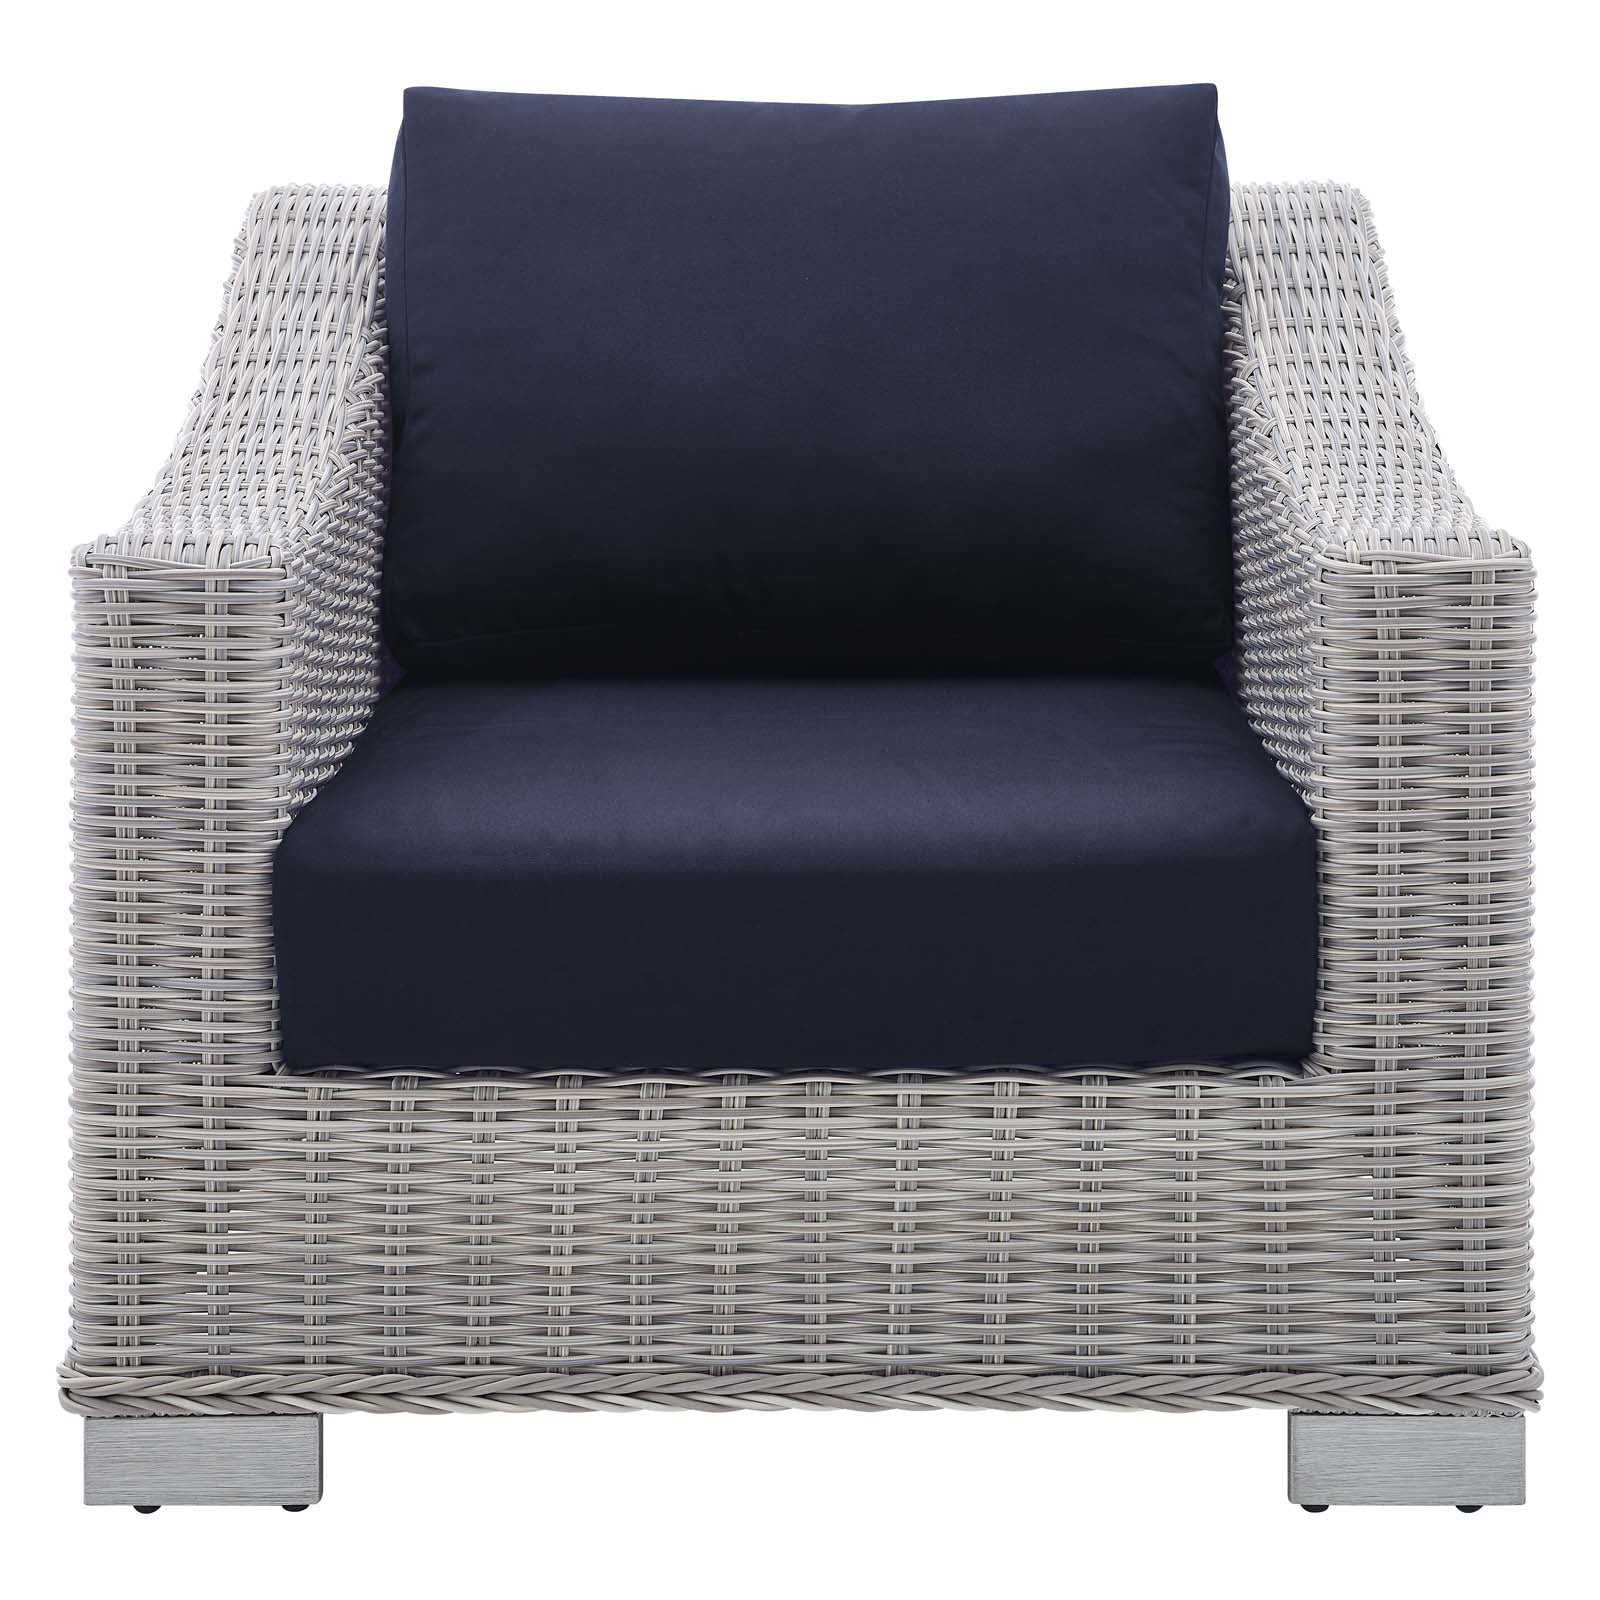 Conway Sunbrella® Outdoor Patio Wicker Rattan Armchair-Outdoor Arm Chair-Modway-Wall2Wall Furnishings